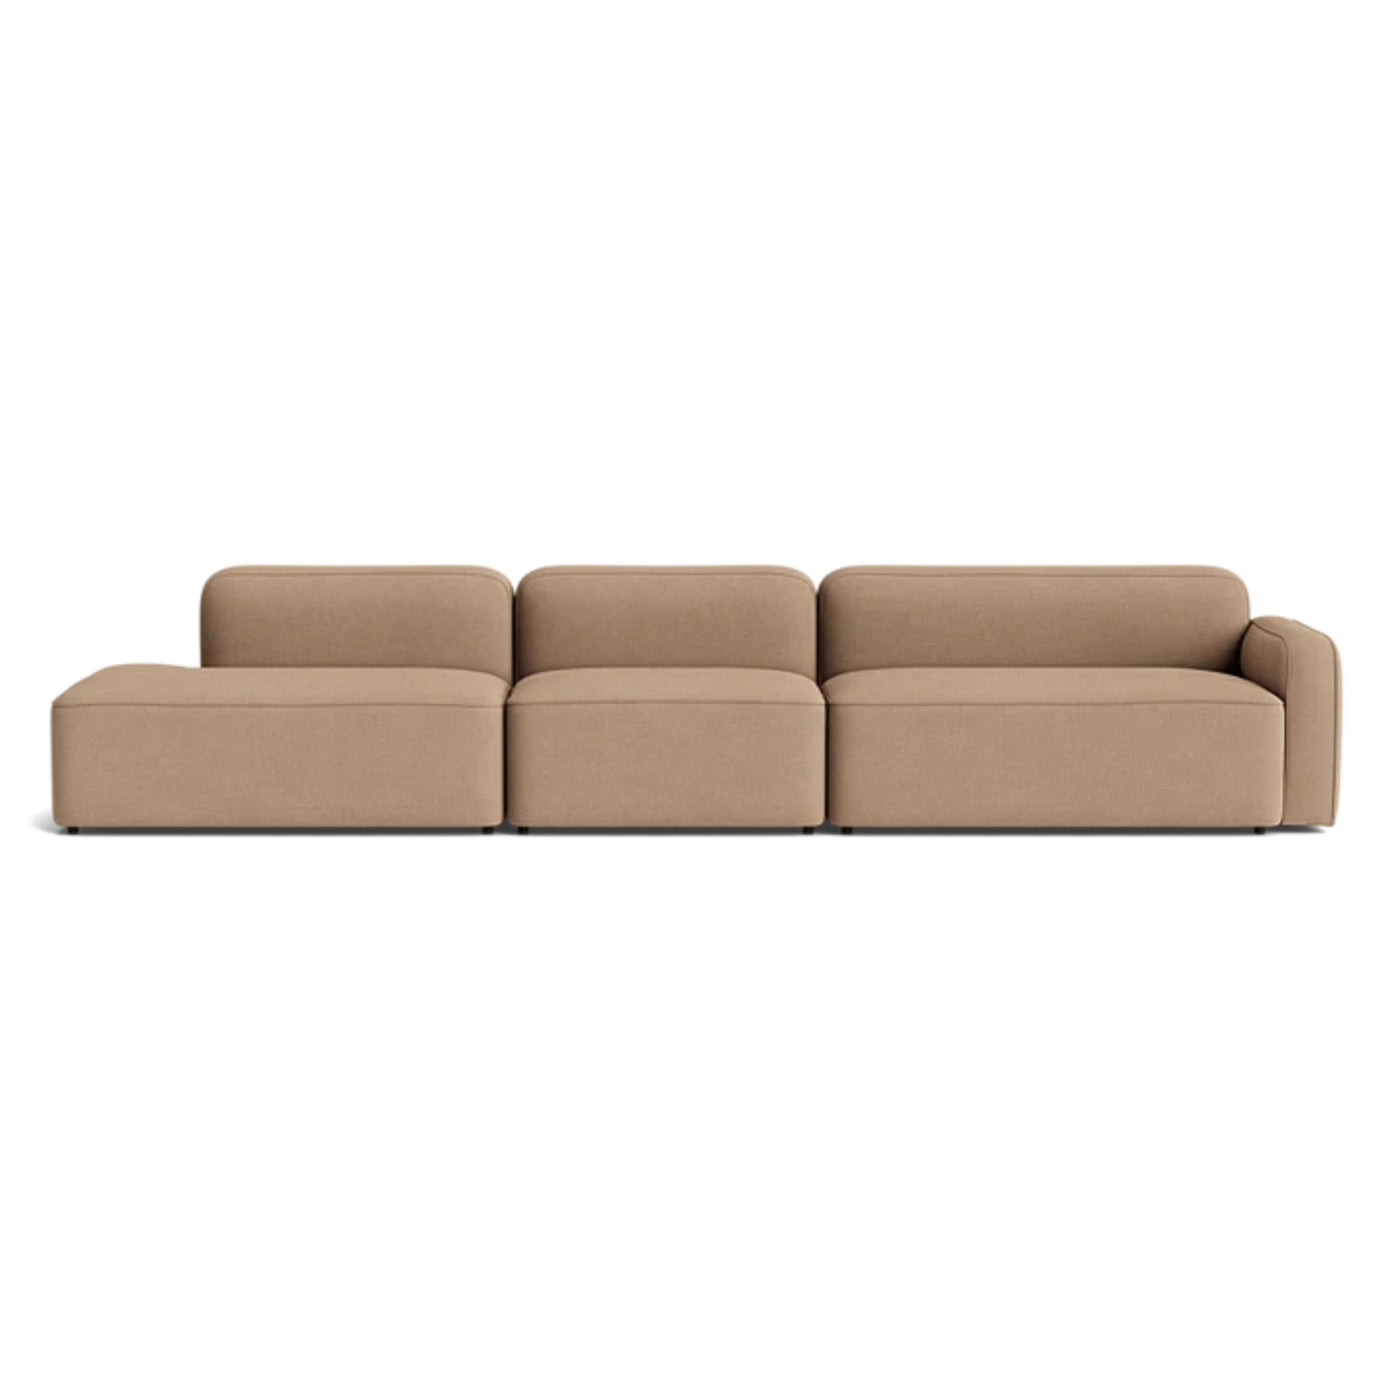 Normann Copenhagen Rope 3 Seater Modular Sofa. Made to order at someday designs. #colour_hallingdal-224